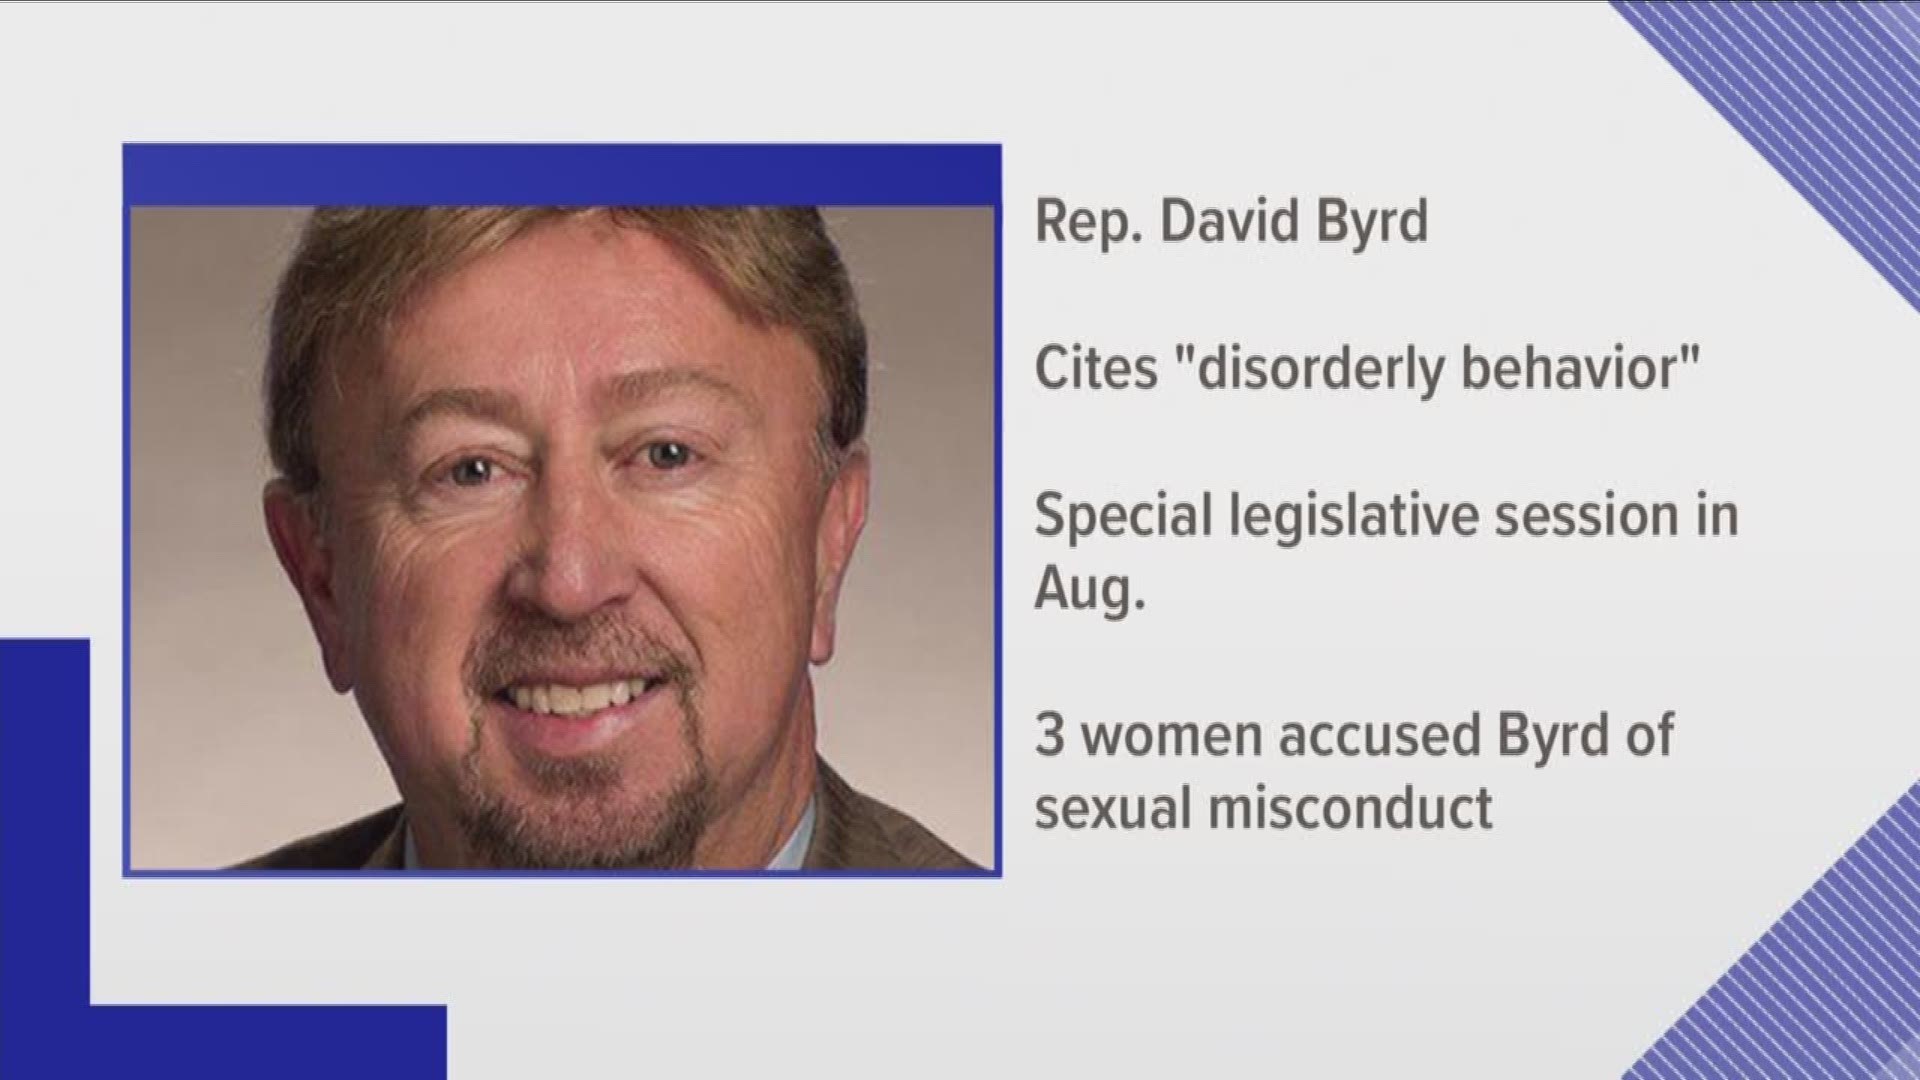 A state lawmaker from Knoxville has filed paperwork to remove representative David Byrd from office.